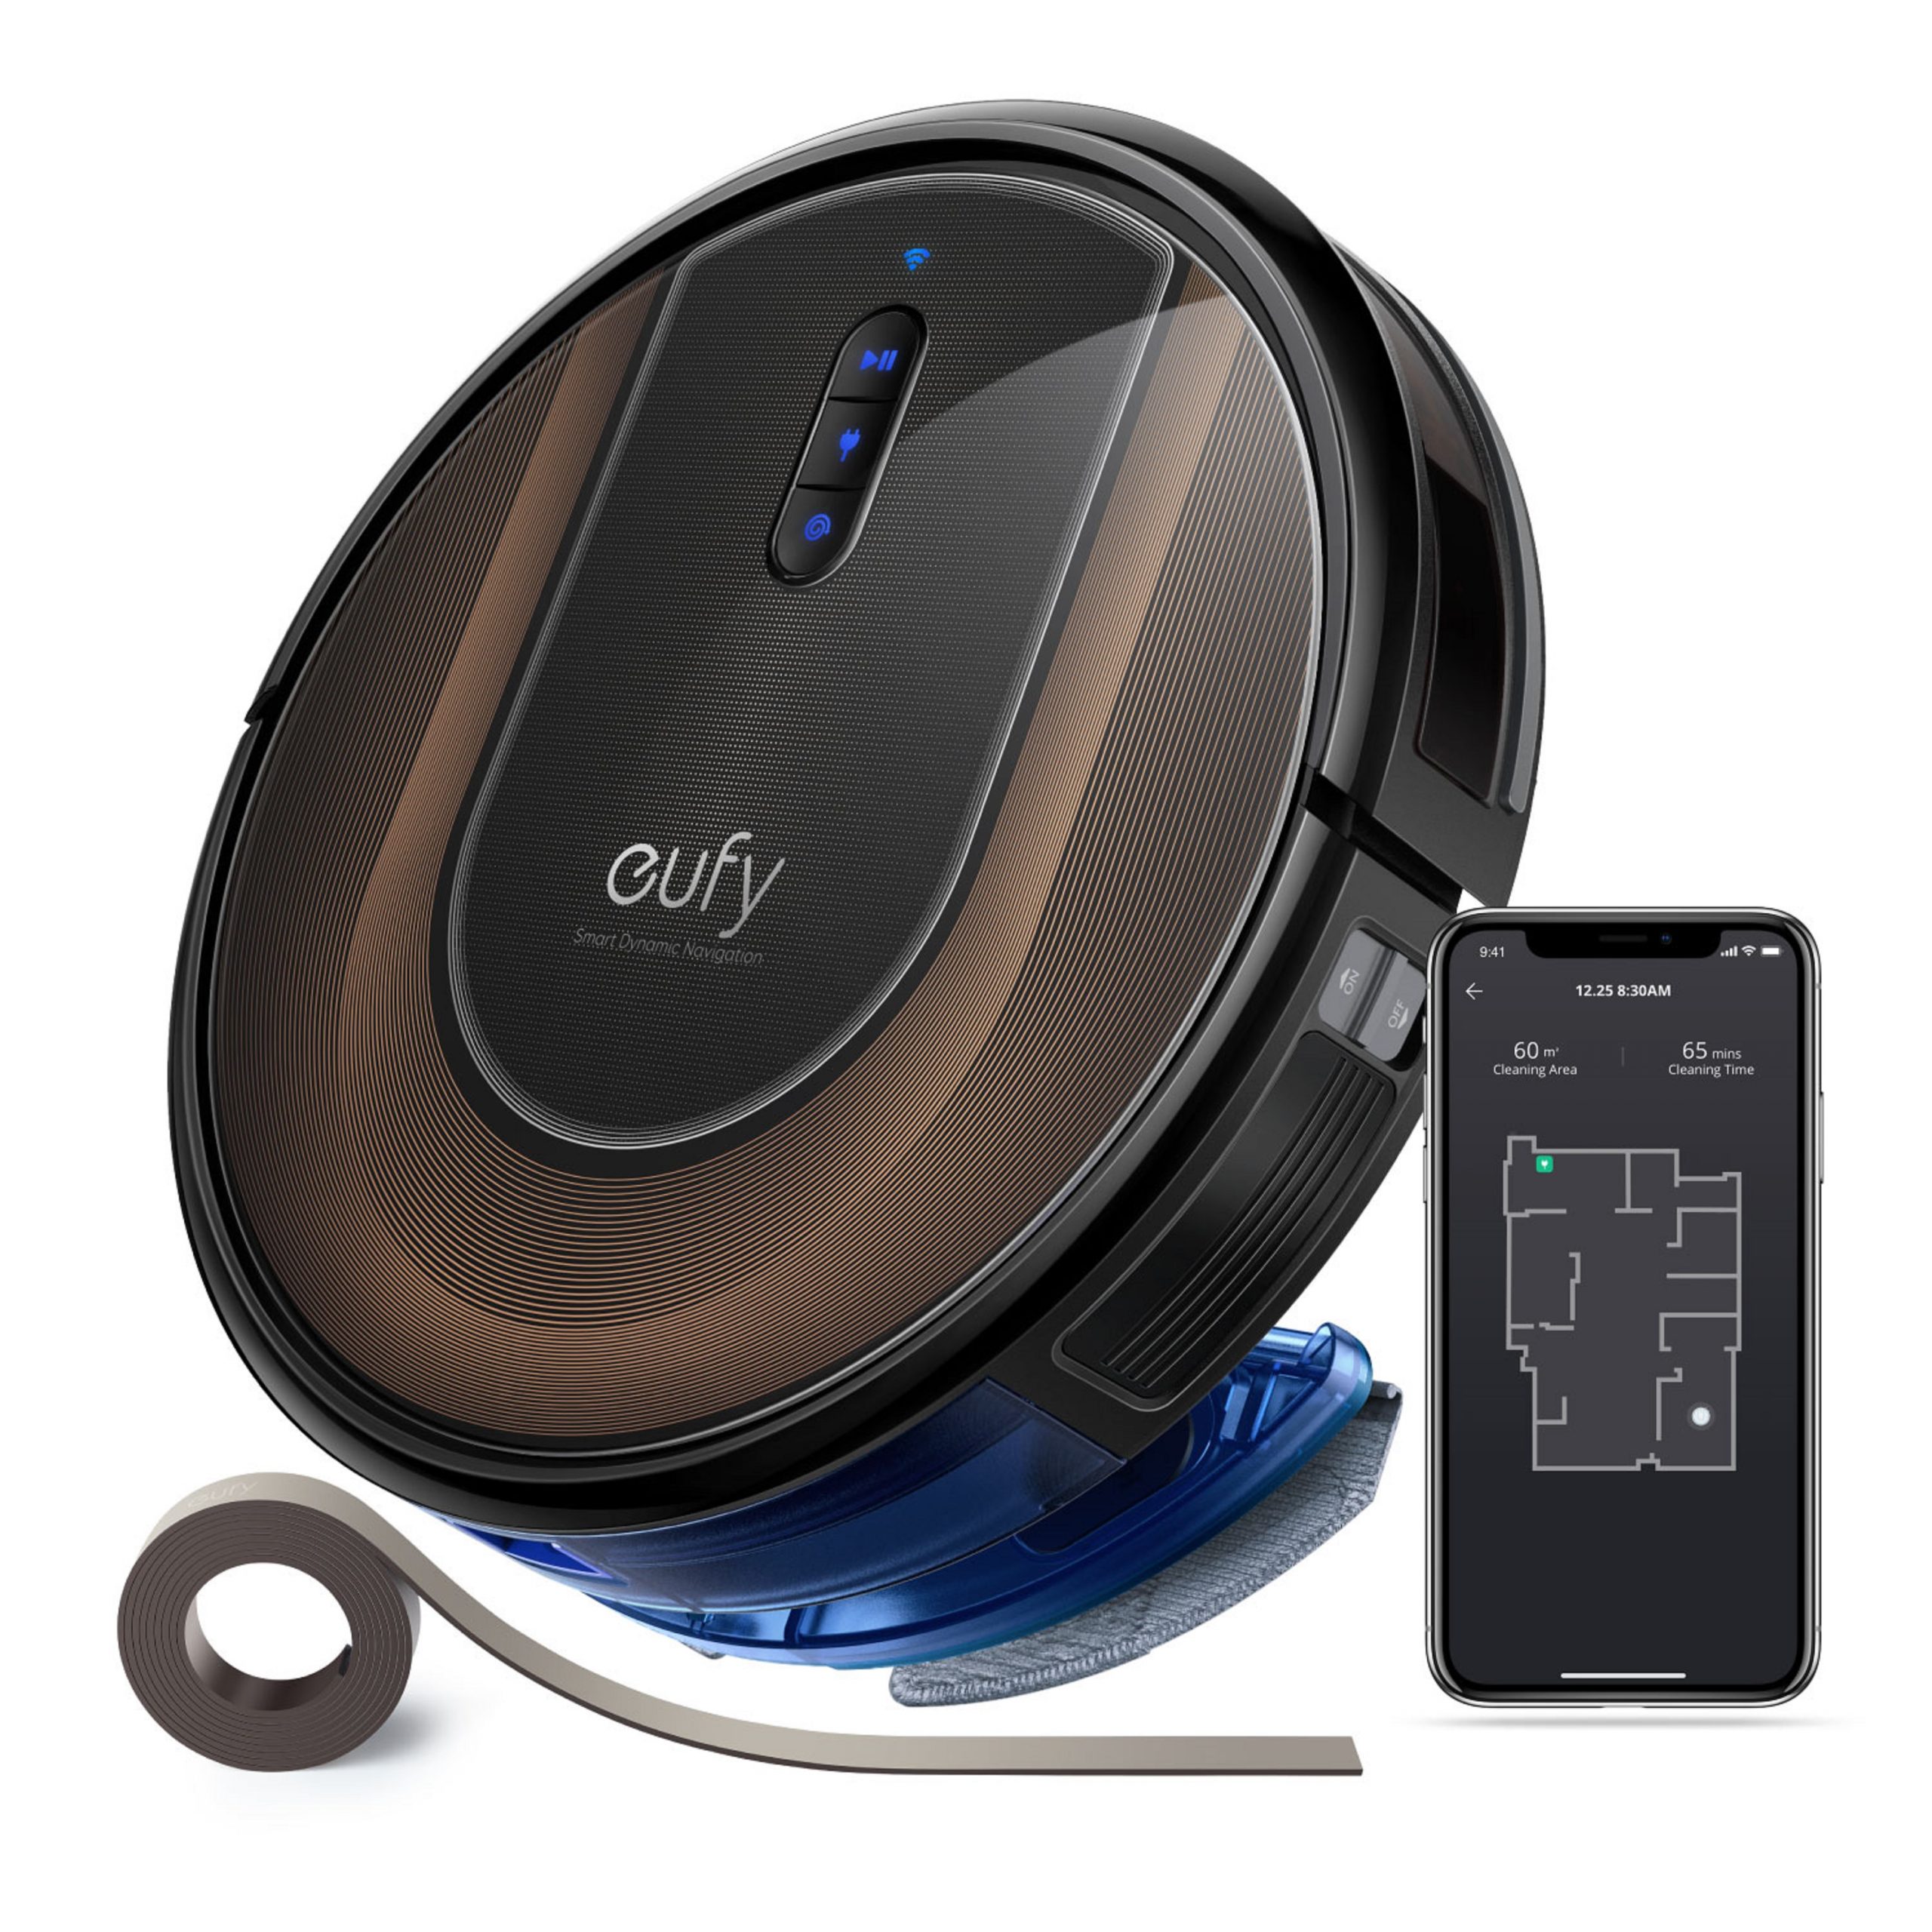 Eufy Robovac G30 Hybrid with smart navigation & 2in1 sweep and wet mopping functions, launched in India